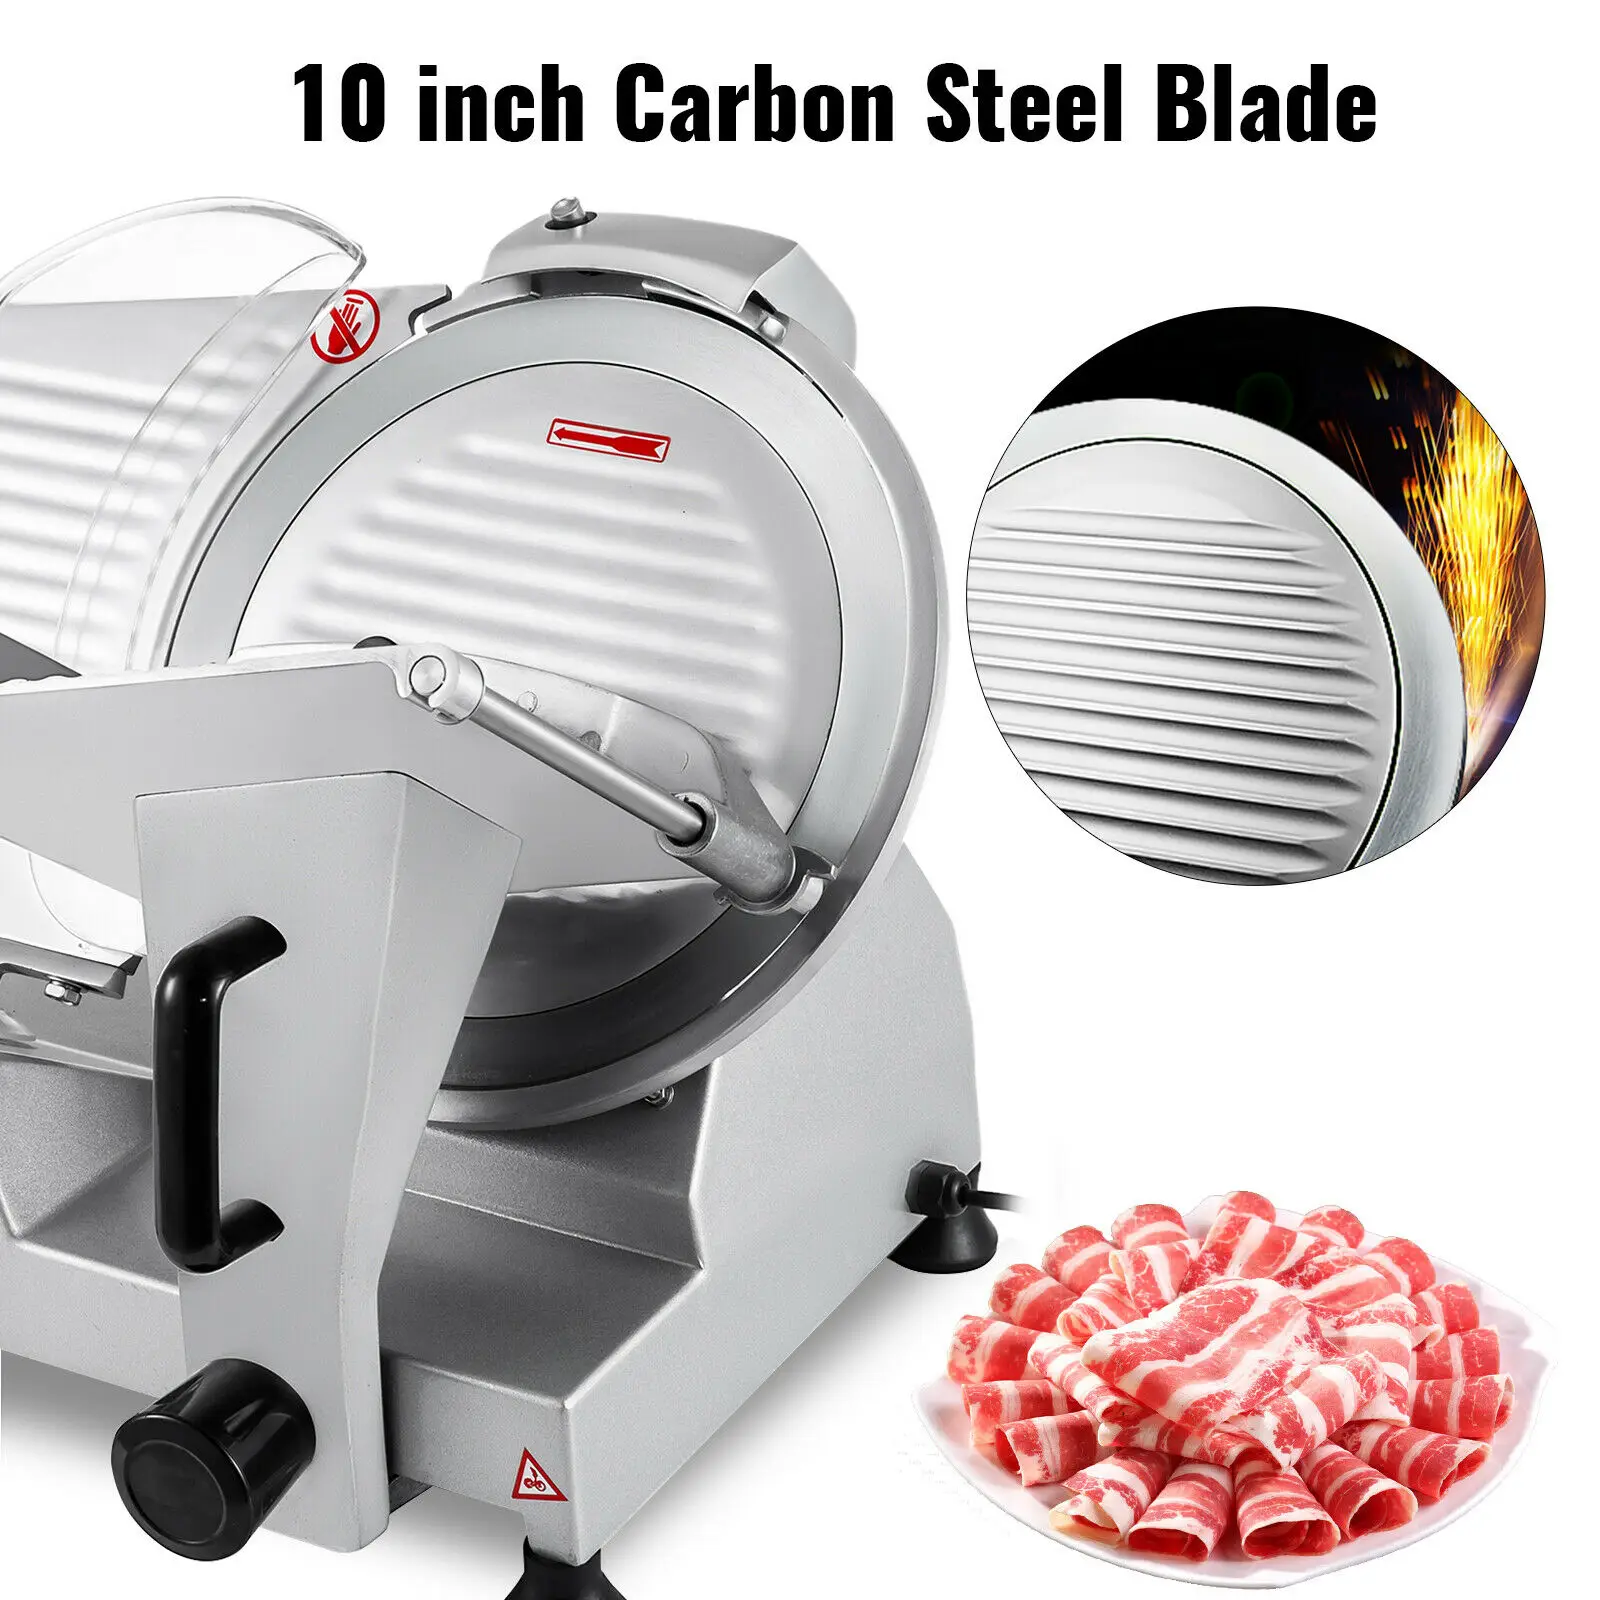 VEVOR 10 Inch Blade Electric Food Slicer Cutter Grinder Meat Slicer Machine for Commercial Deli Meat Cheese Beef Mutton Turkey 3